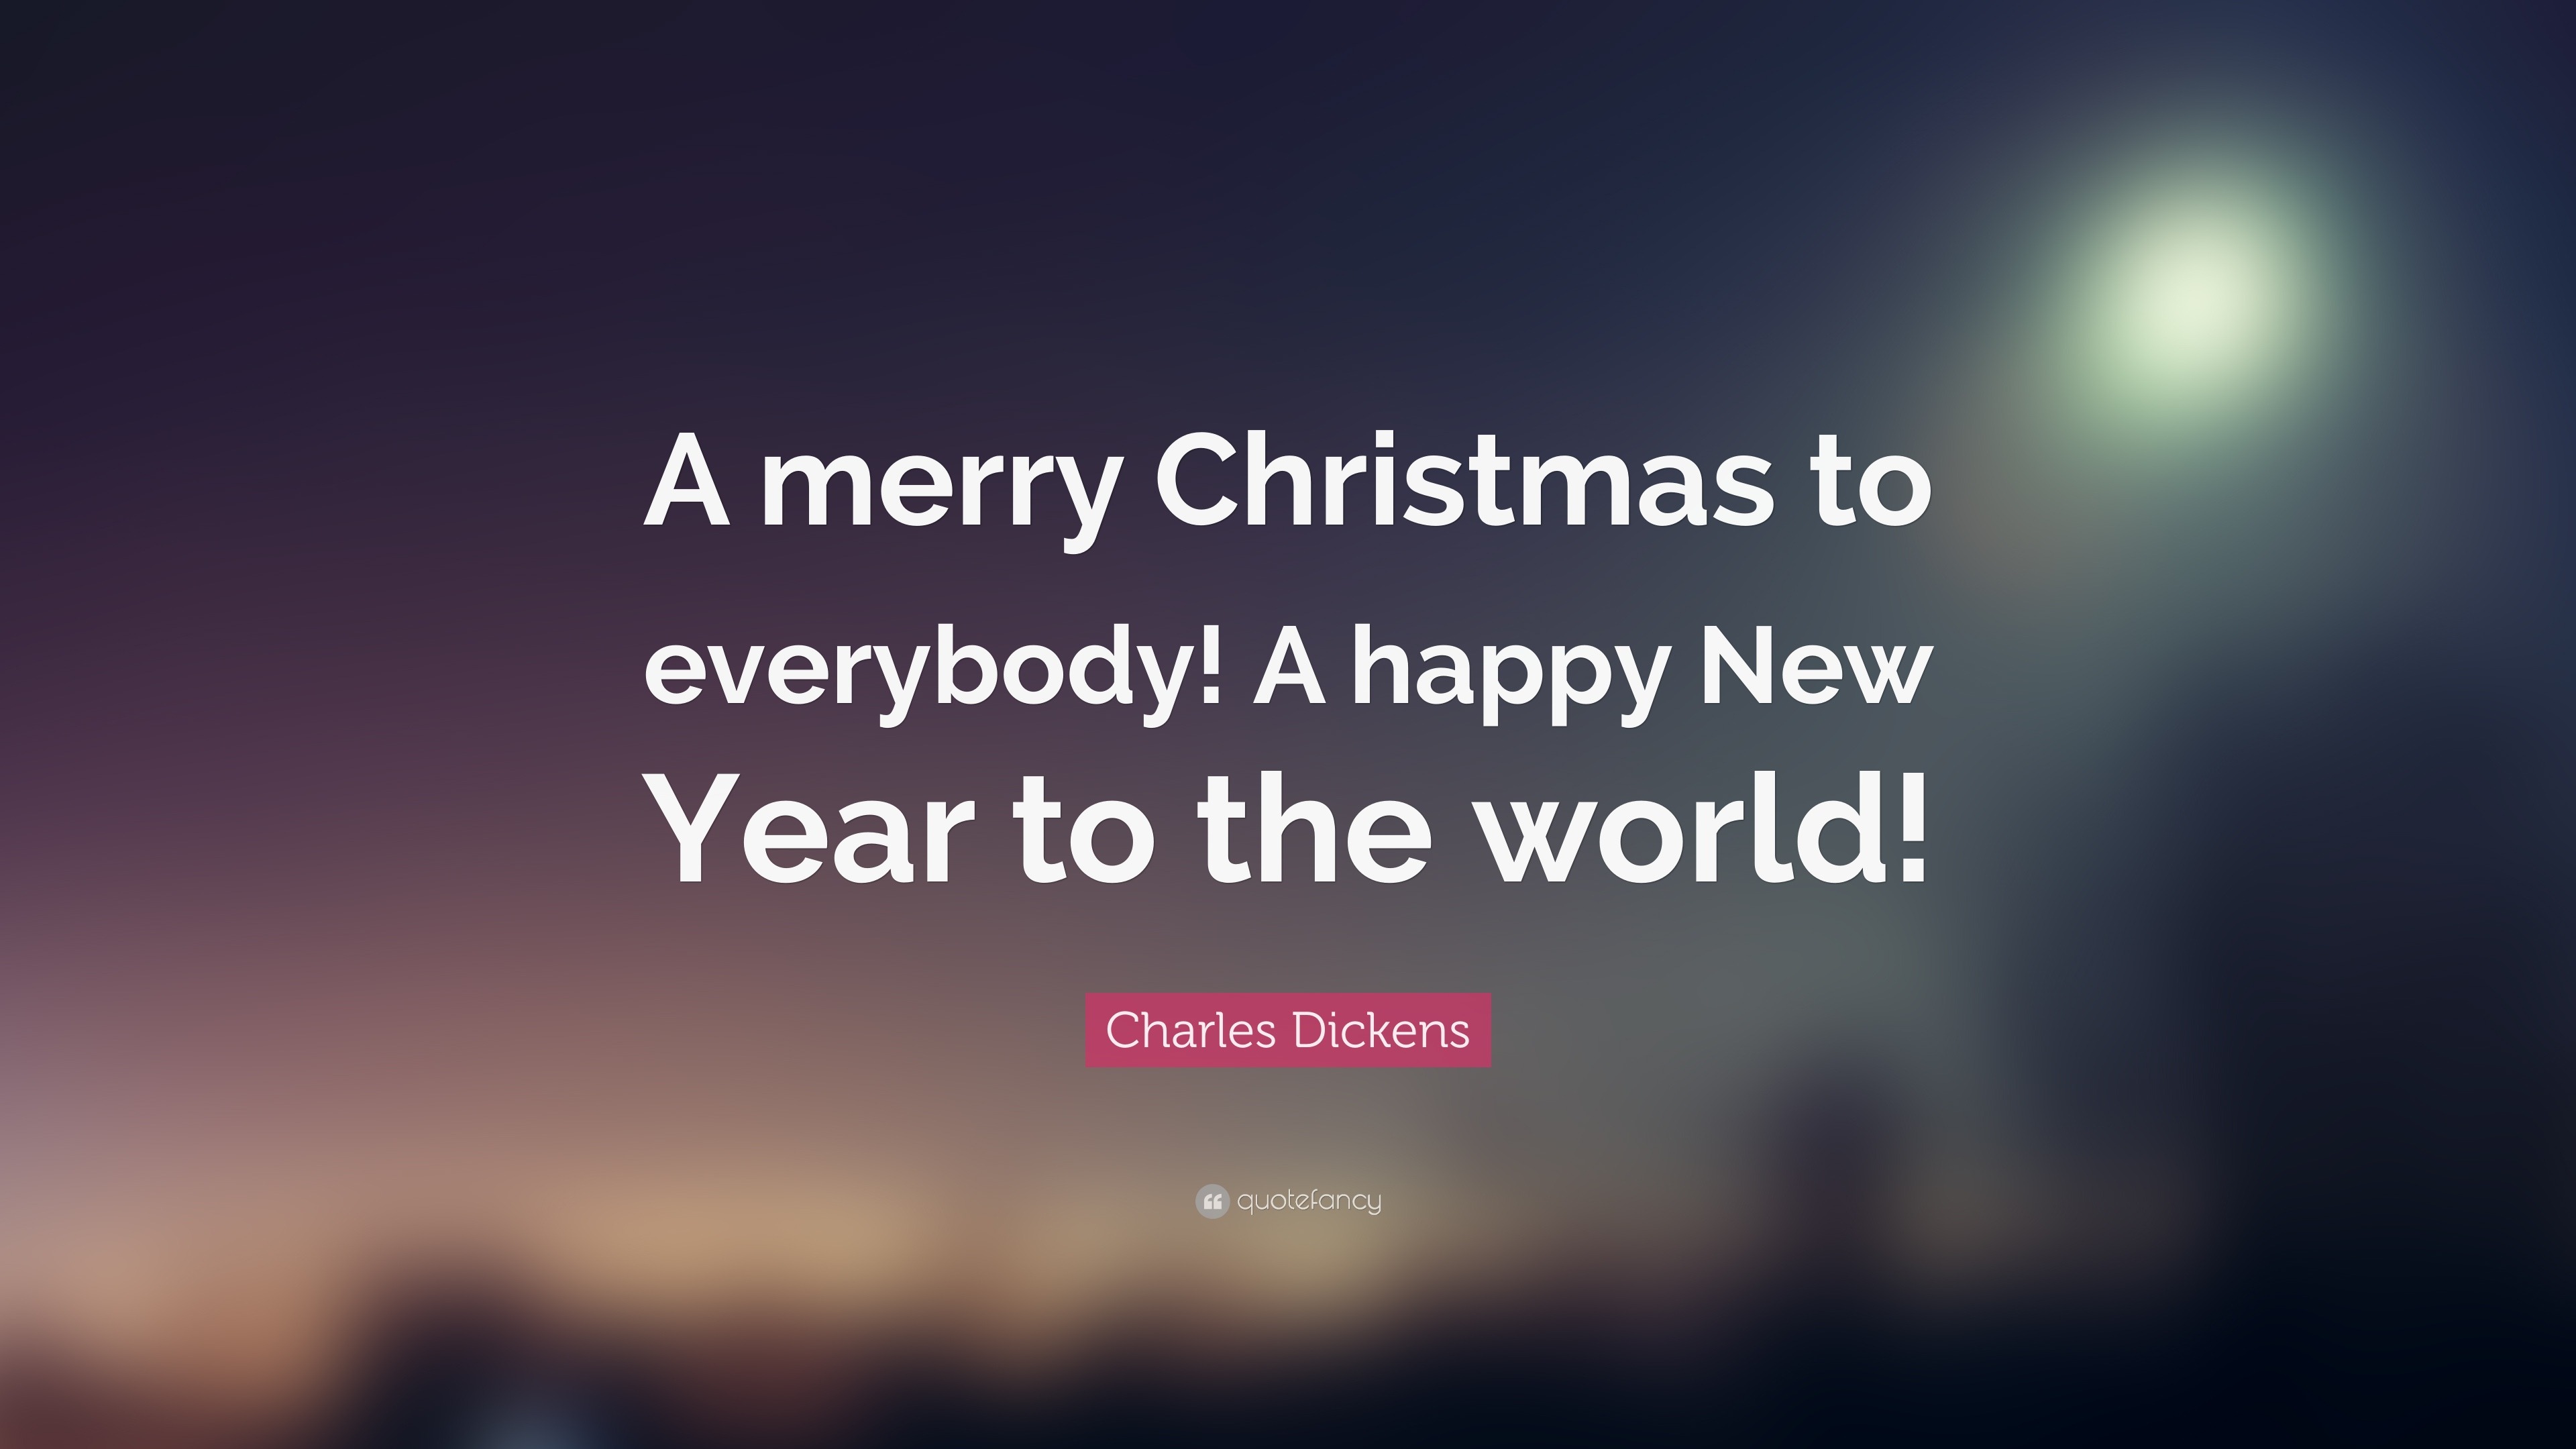 Charles Dickens Quote A Merry Christmas To Everybody A Happy New Year To The World 10 Wallpapers Quotefancy